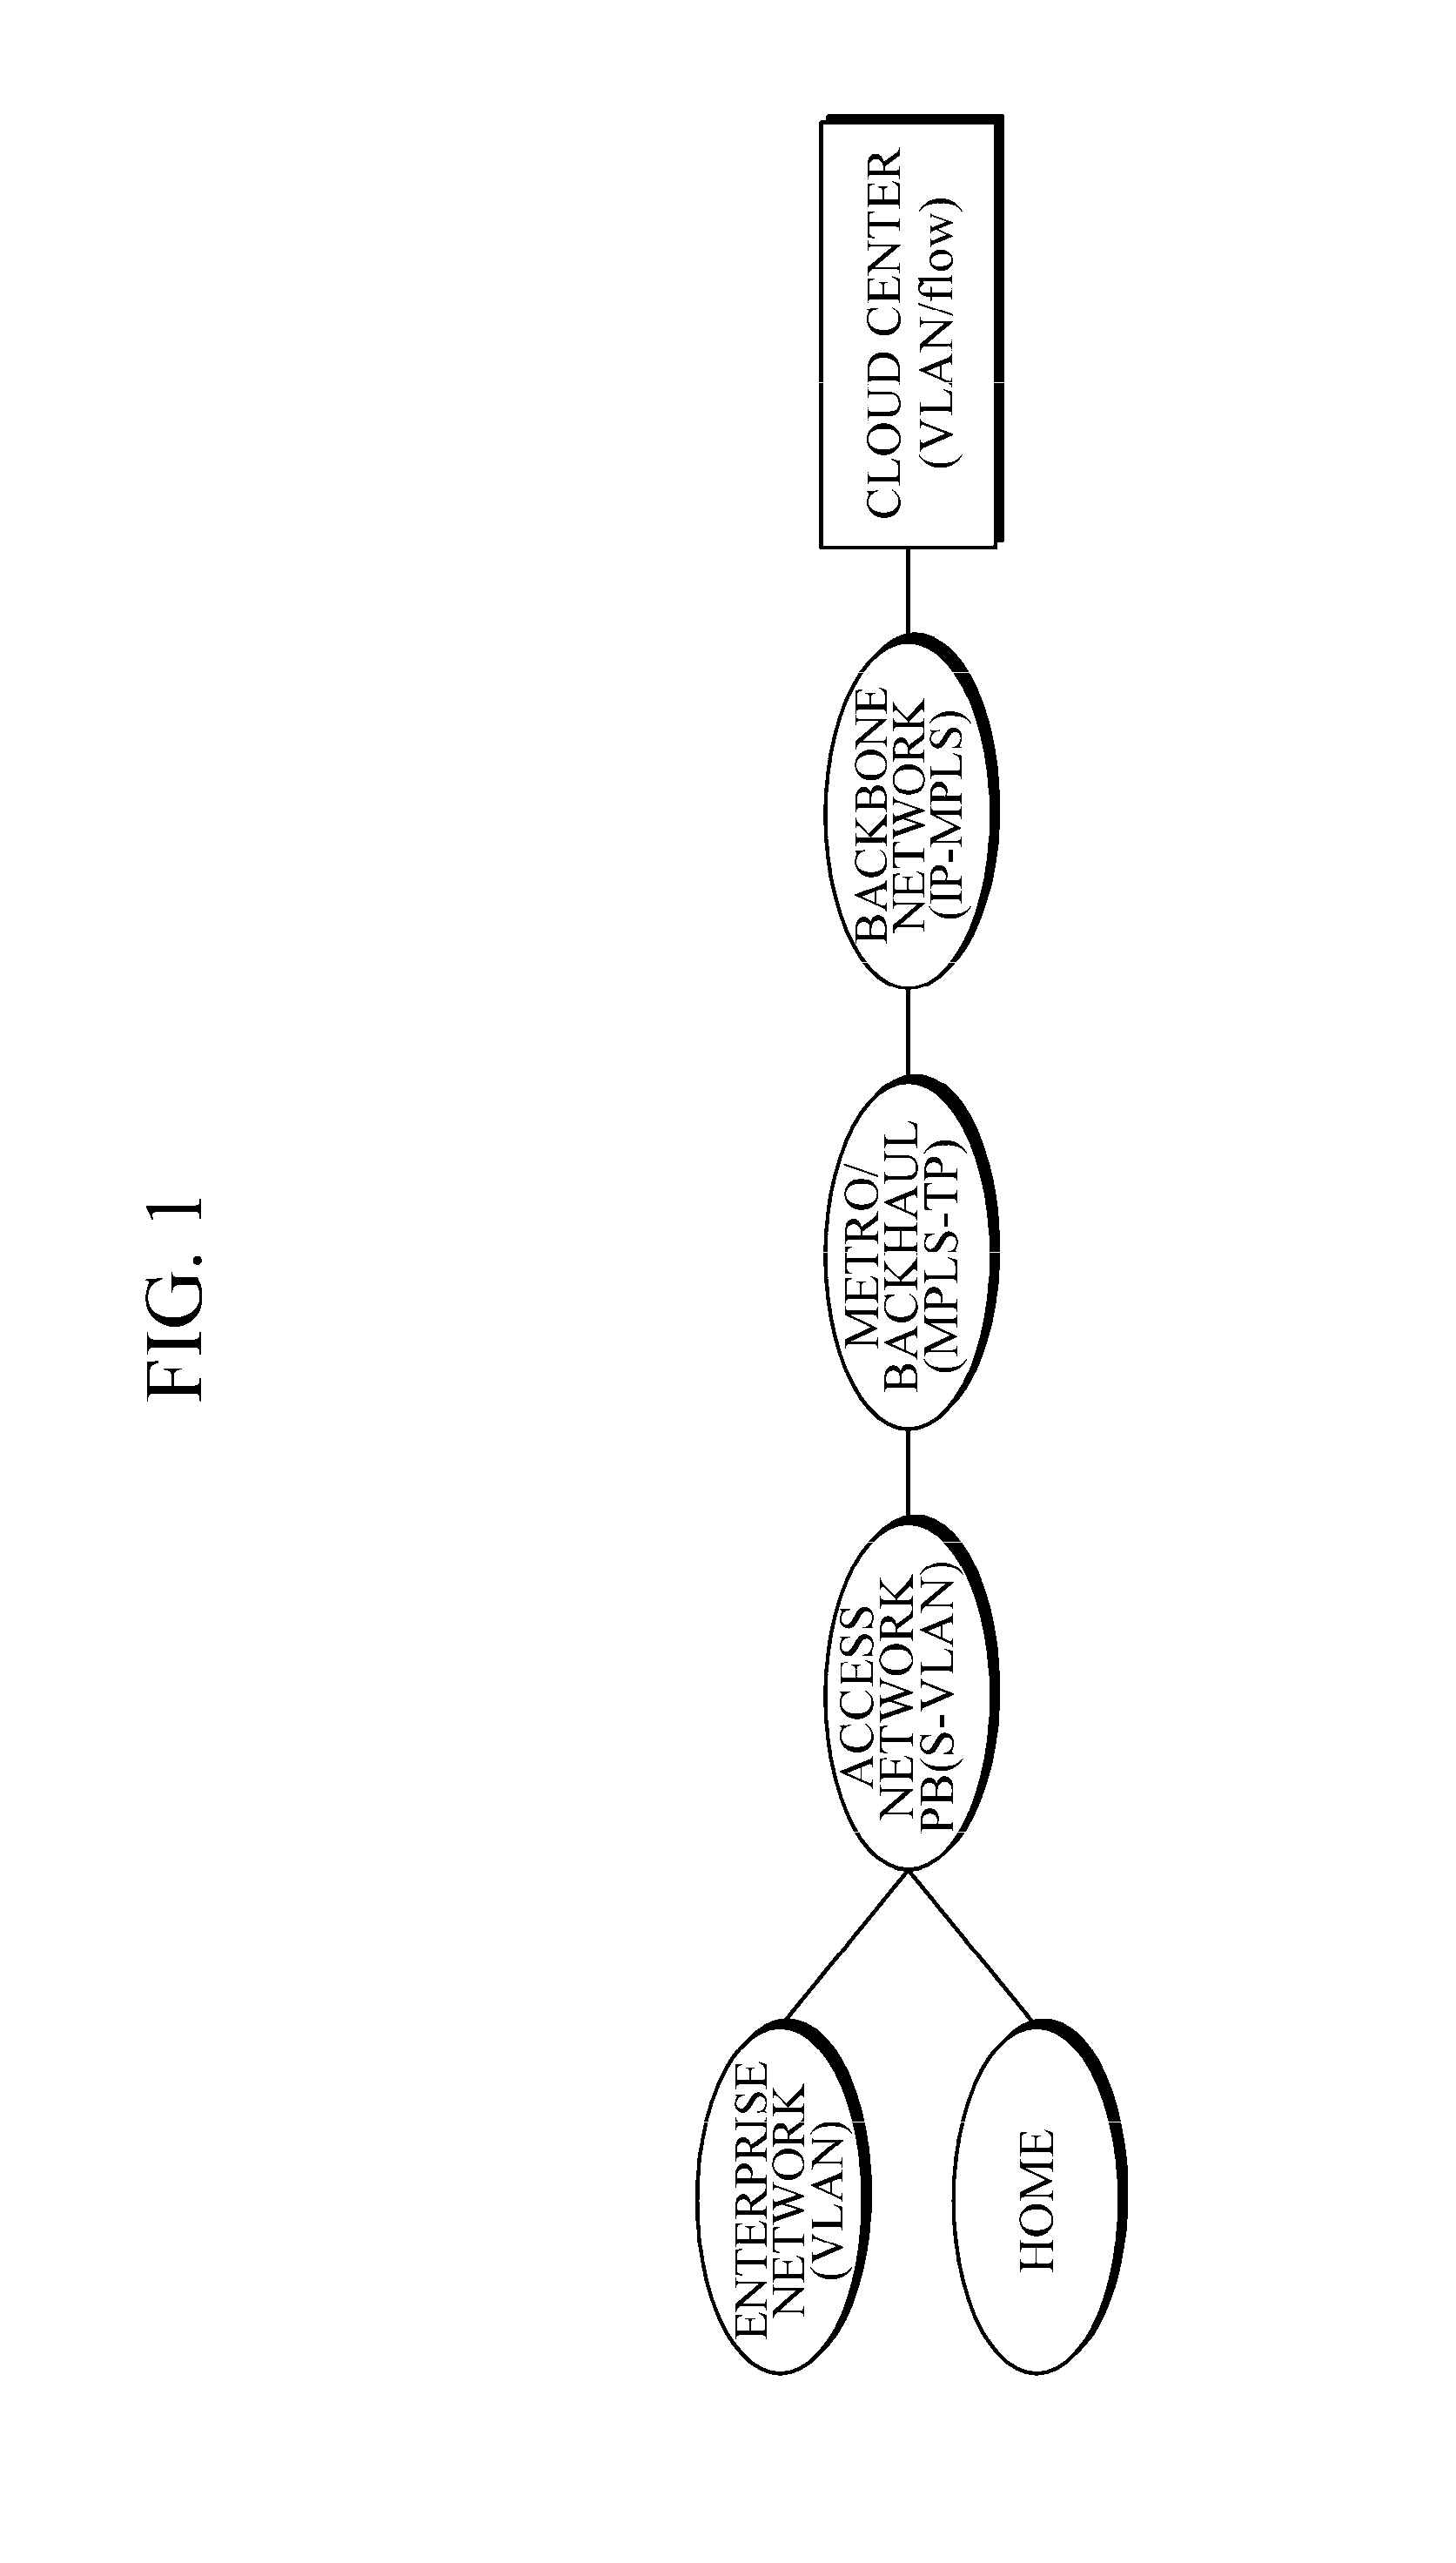 Integrated VPN management and control apparatus and method